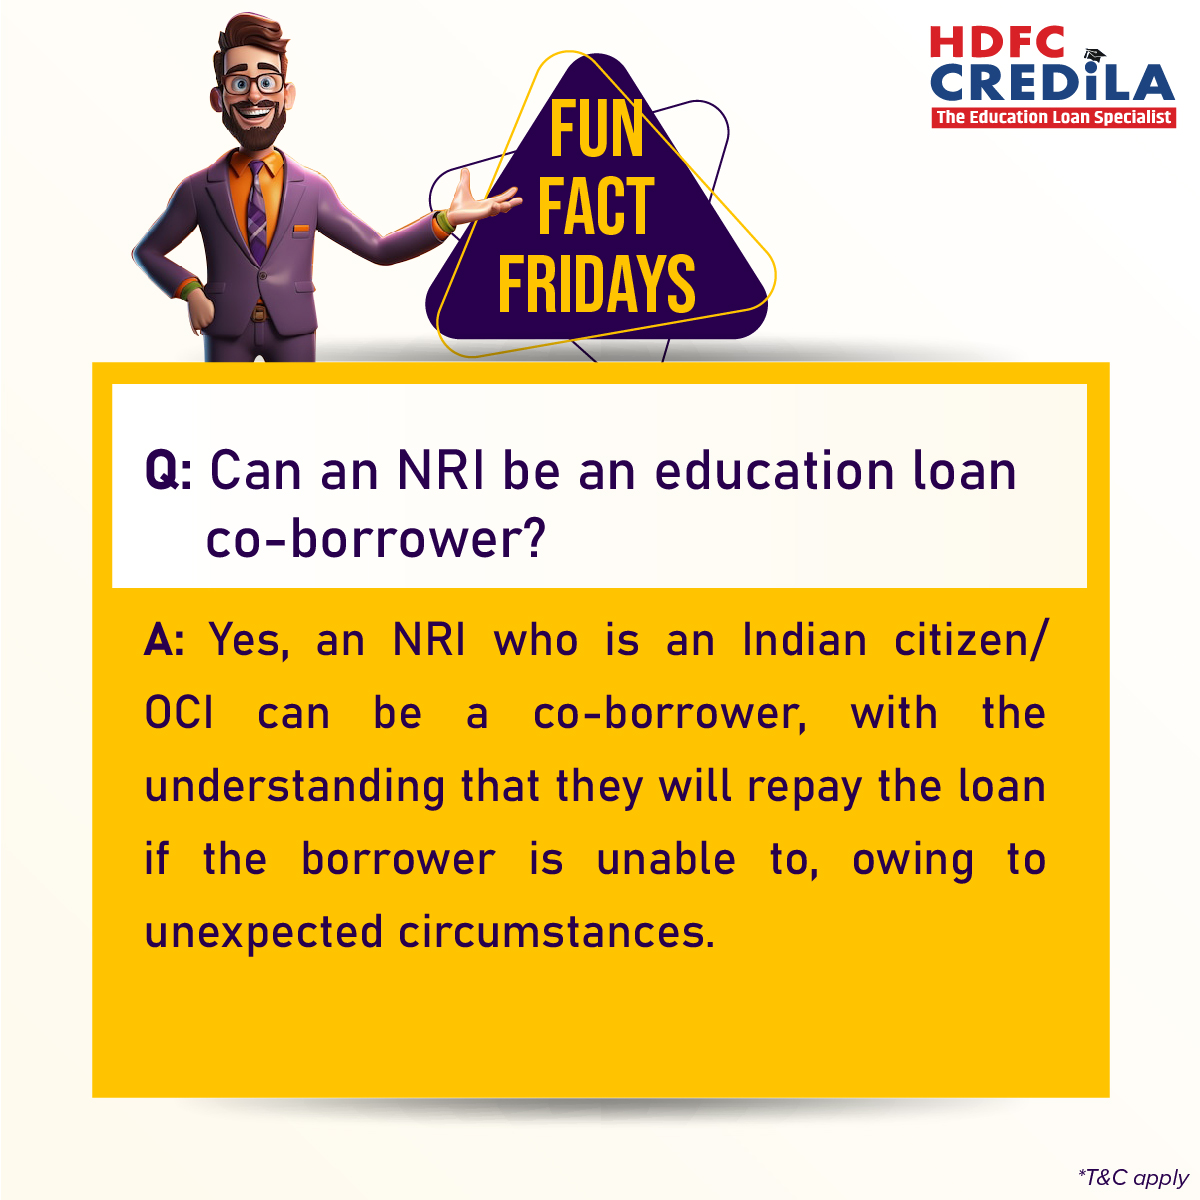 Whether you plan to pursue your education in India or overseas, we have a customised student loan solution for you! Visit us at bit.ly/3TexYDe for details and to apply. 
*T&C apply

#HDFCCredila #FunFactFriday #EducationLoan #StudentLoan #NRI #Coborrower